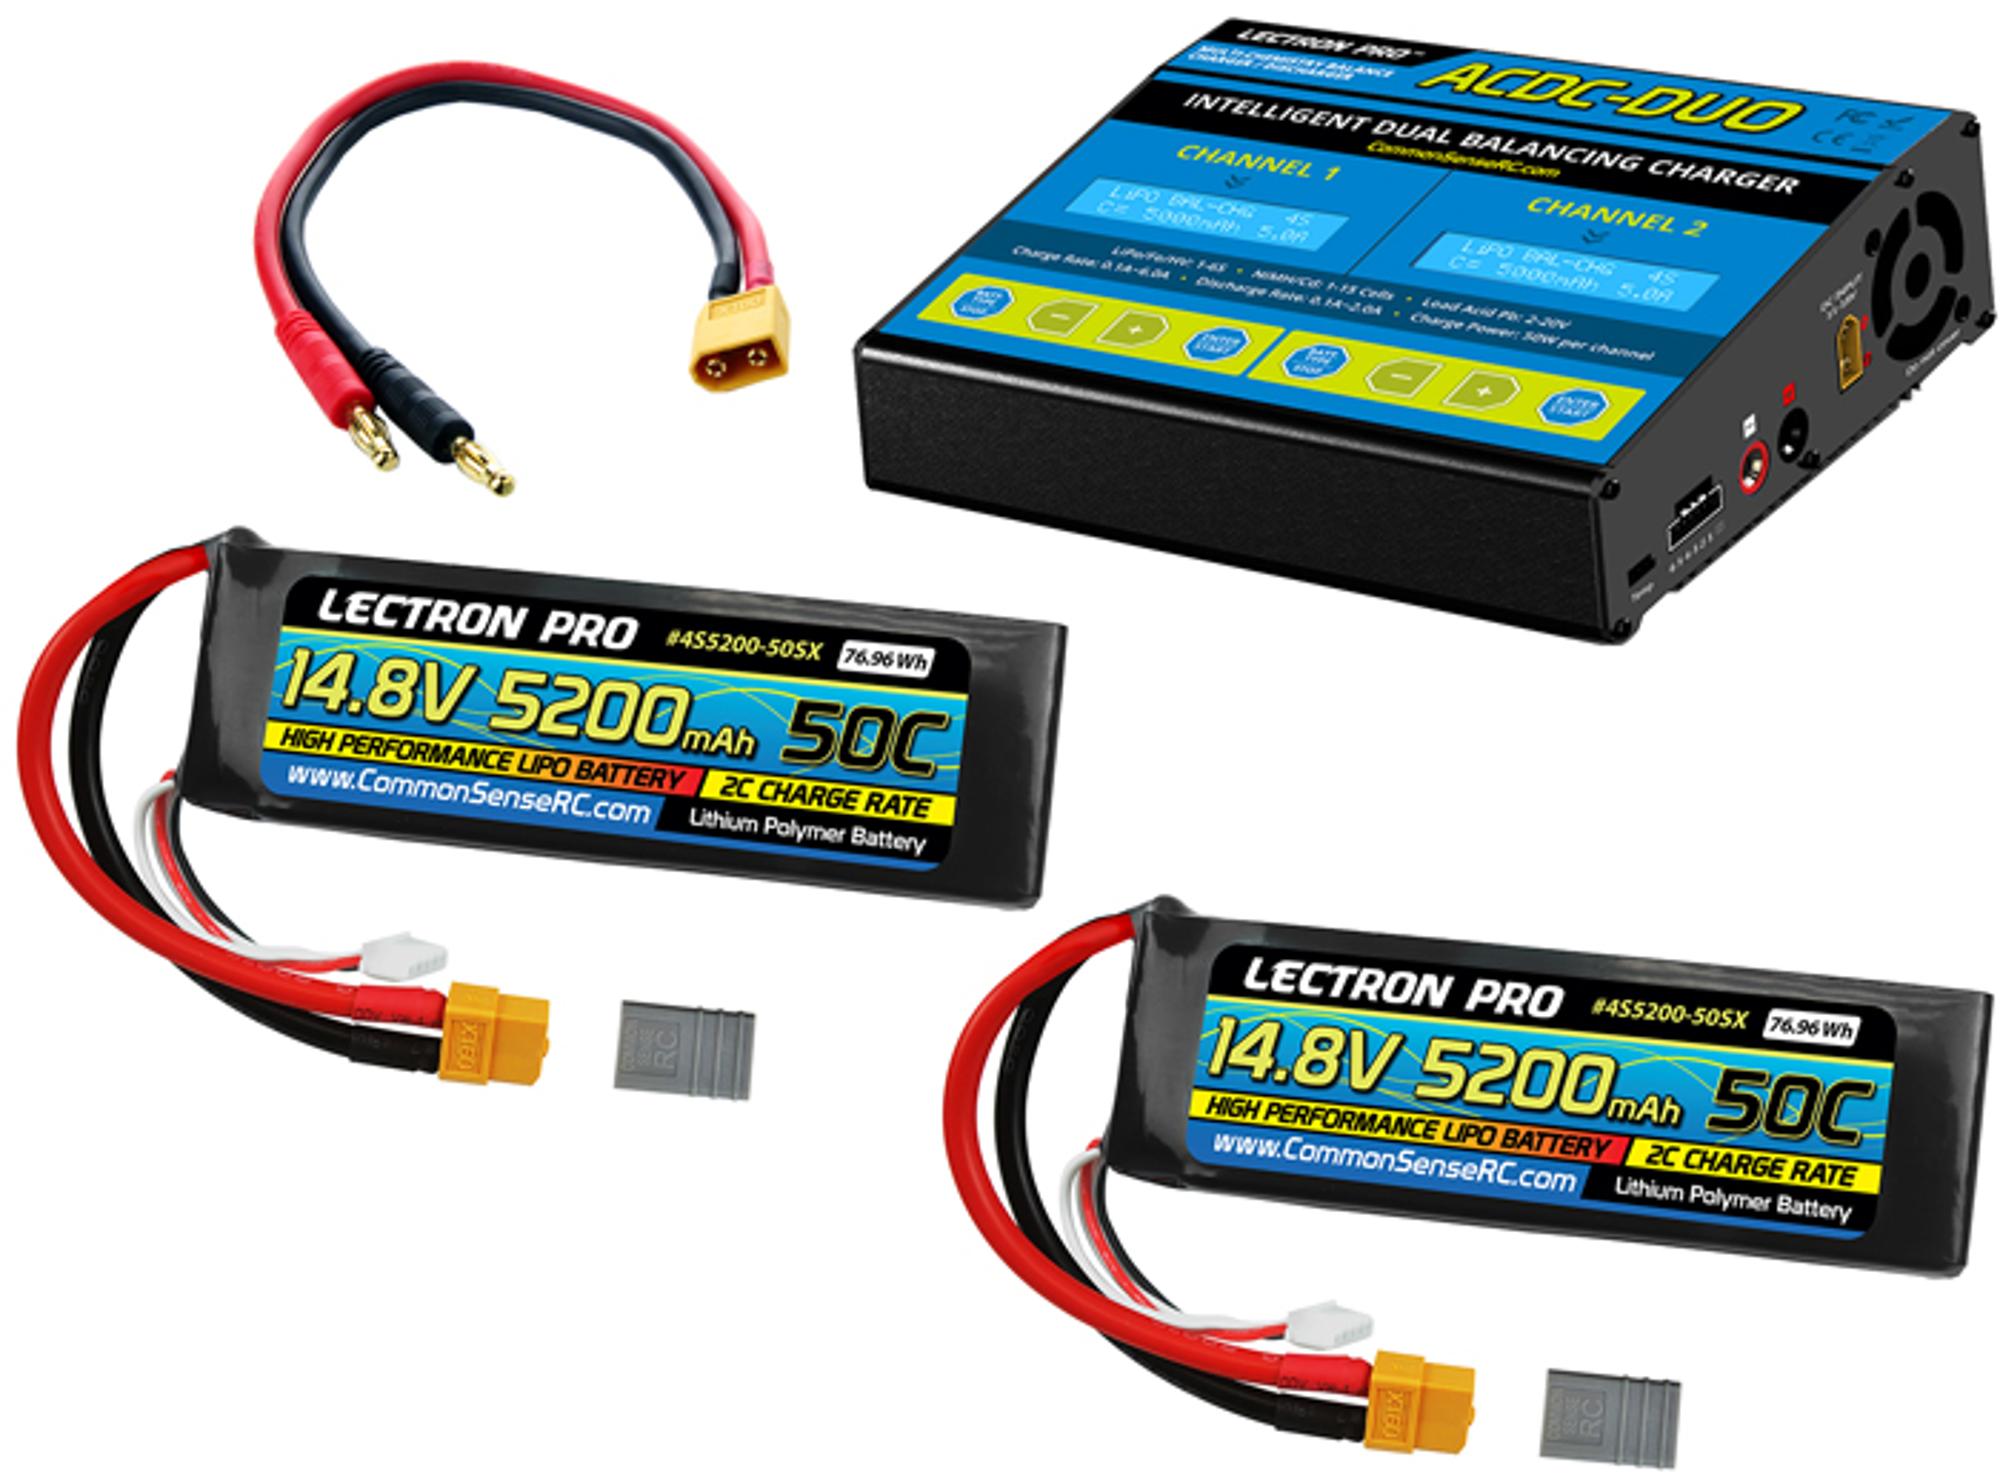 Common Sense Power Pack #57 ACDC-DUO Charger w/ 14.8v 5200mAh 50C Soft Pack LiPo Batteries, XT60 Adapter